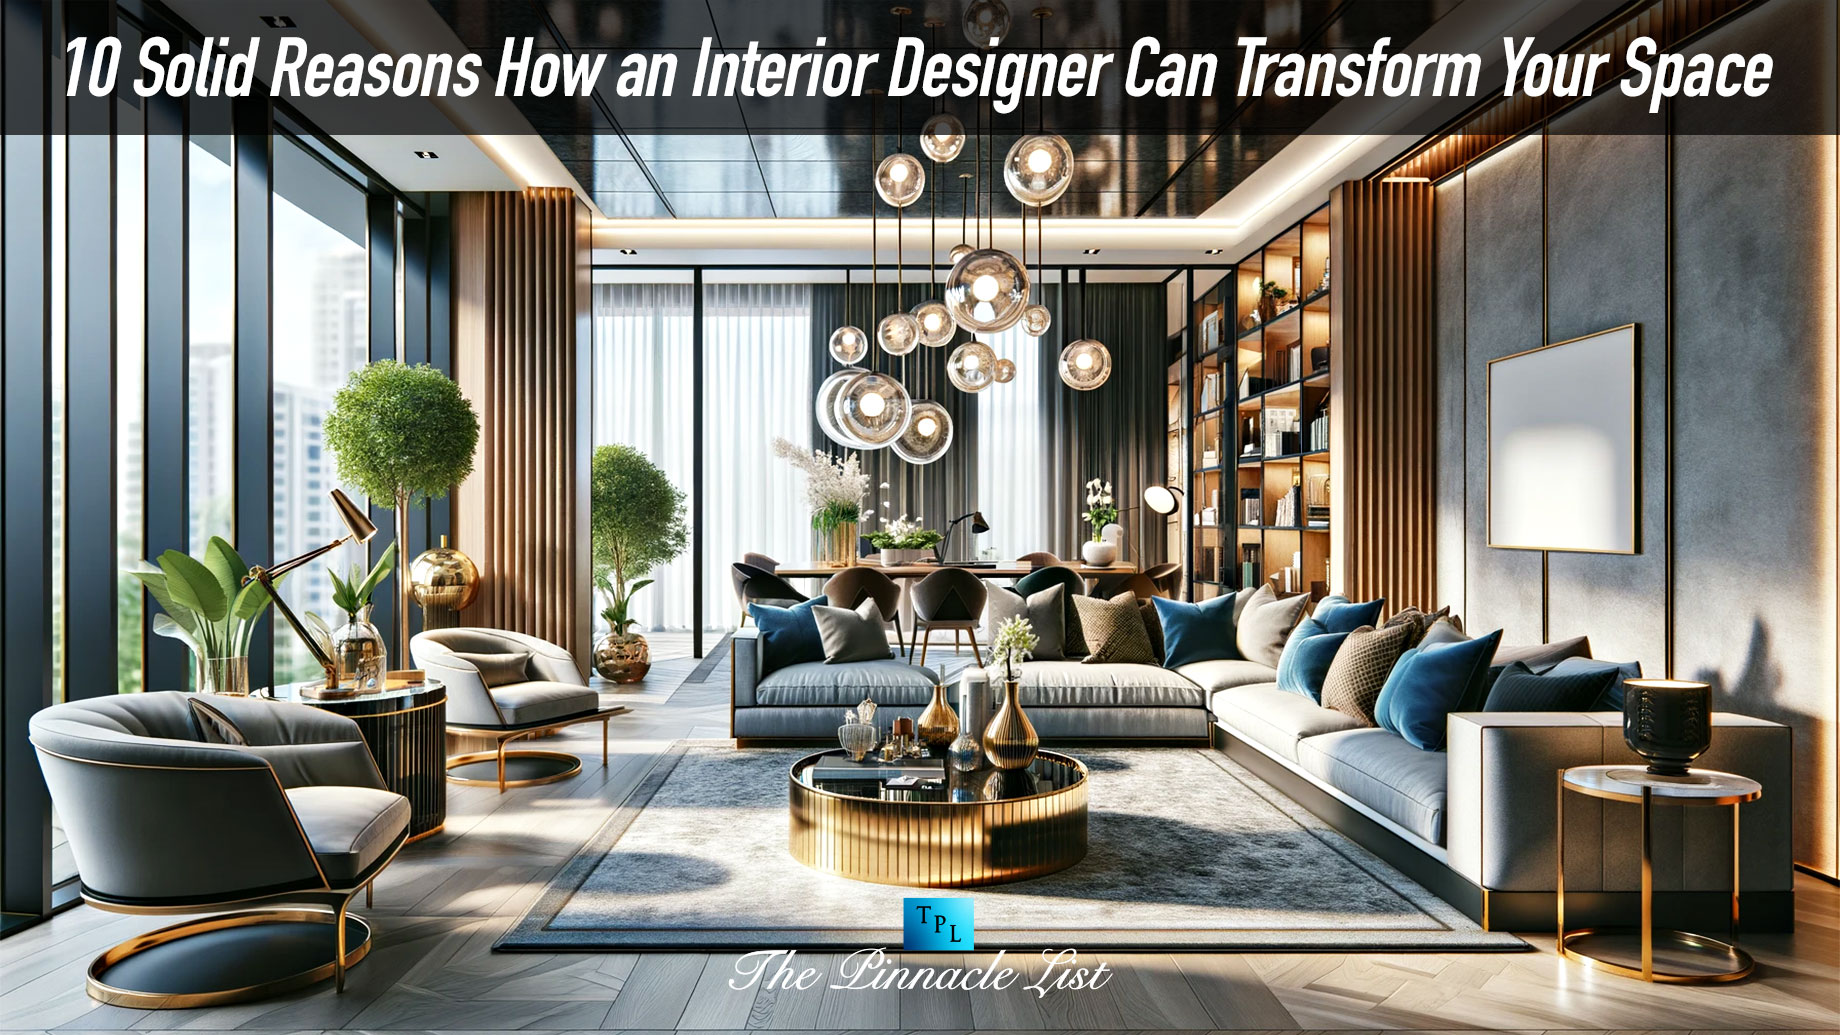 10 Solid Reasons How an Interior Designer Can Transform Your Space